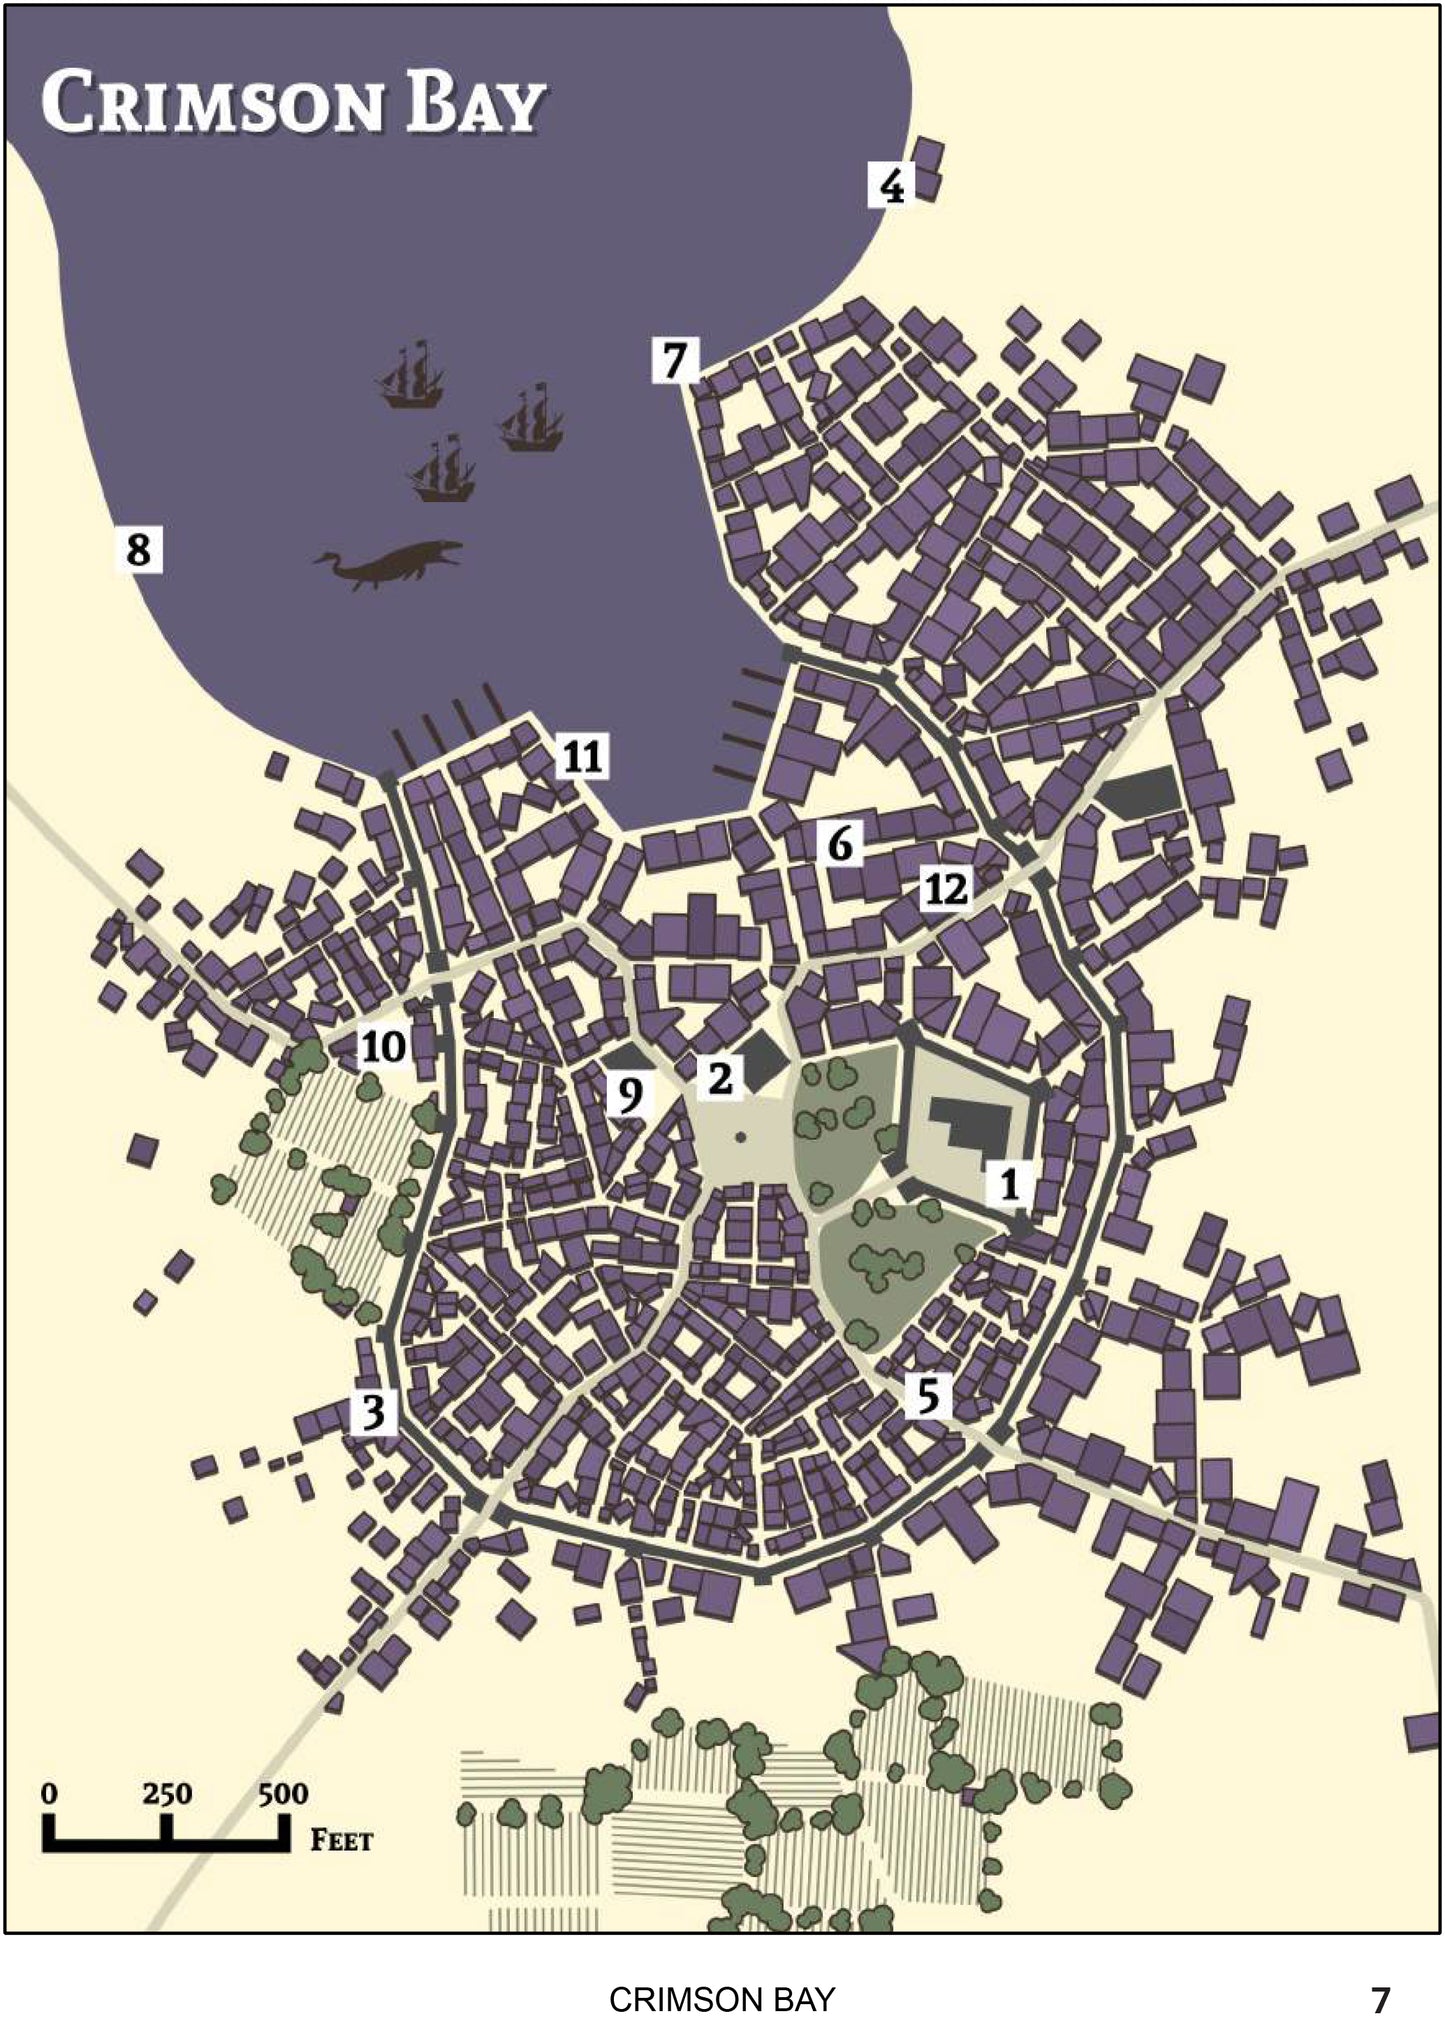 Just Passing Through: 12 Mid-Sized Towns for Any Fantasy RPG